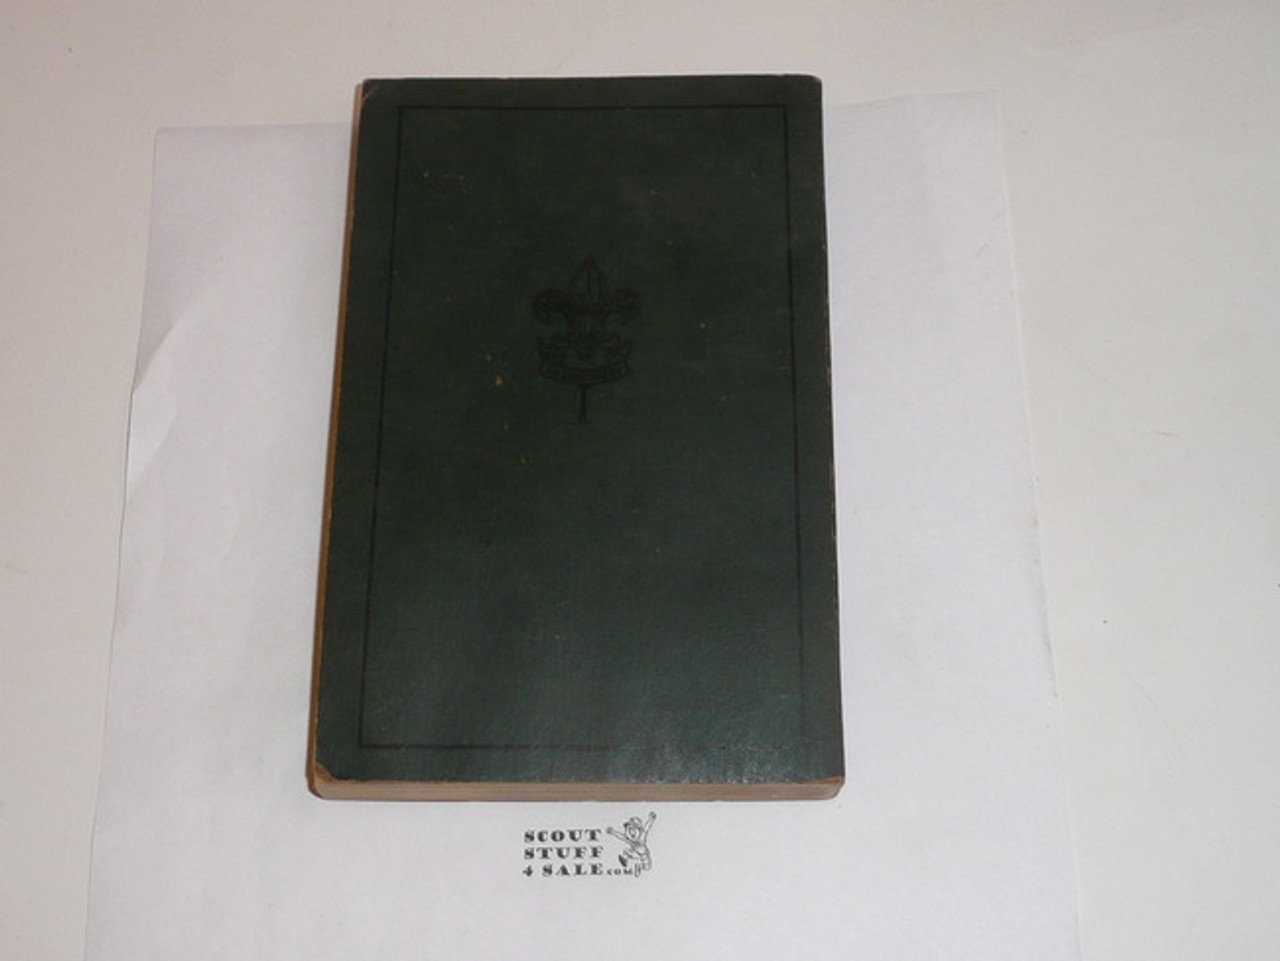 1929 Handbook For Patrol Leaders, First Edition, Second Printing, Near MINT Condition